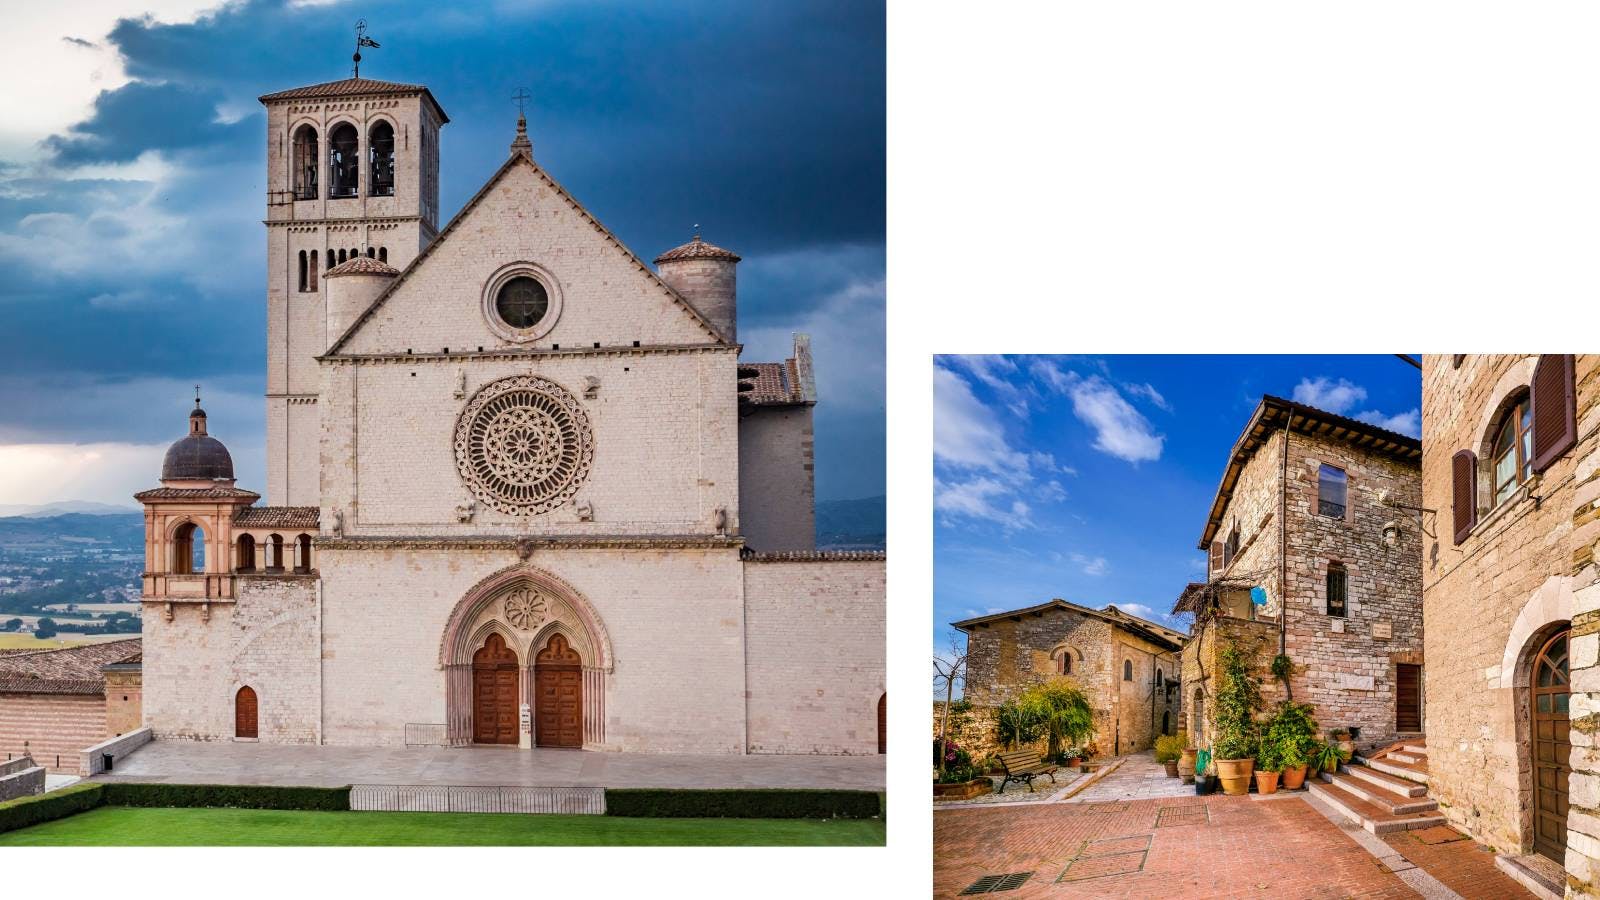 San Francesco Church in Assisi and street in the historical centre Assisi